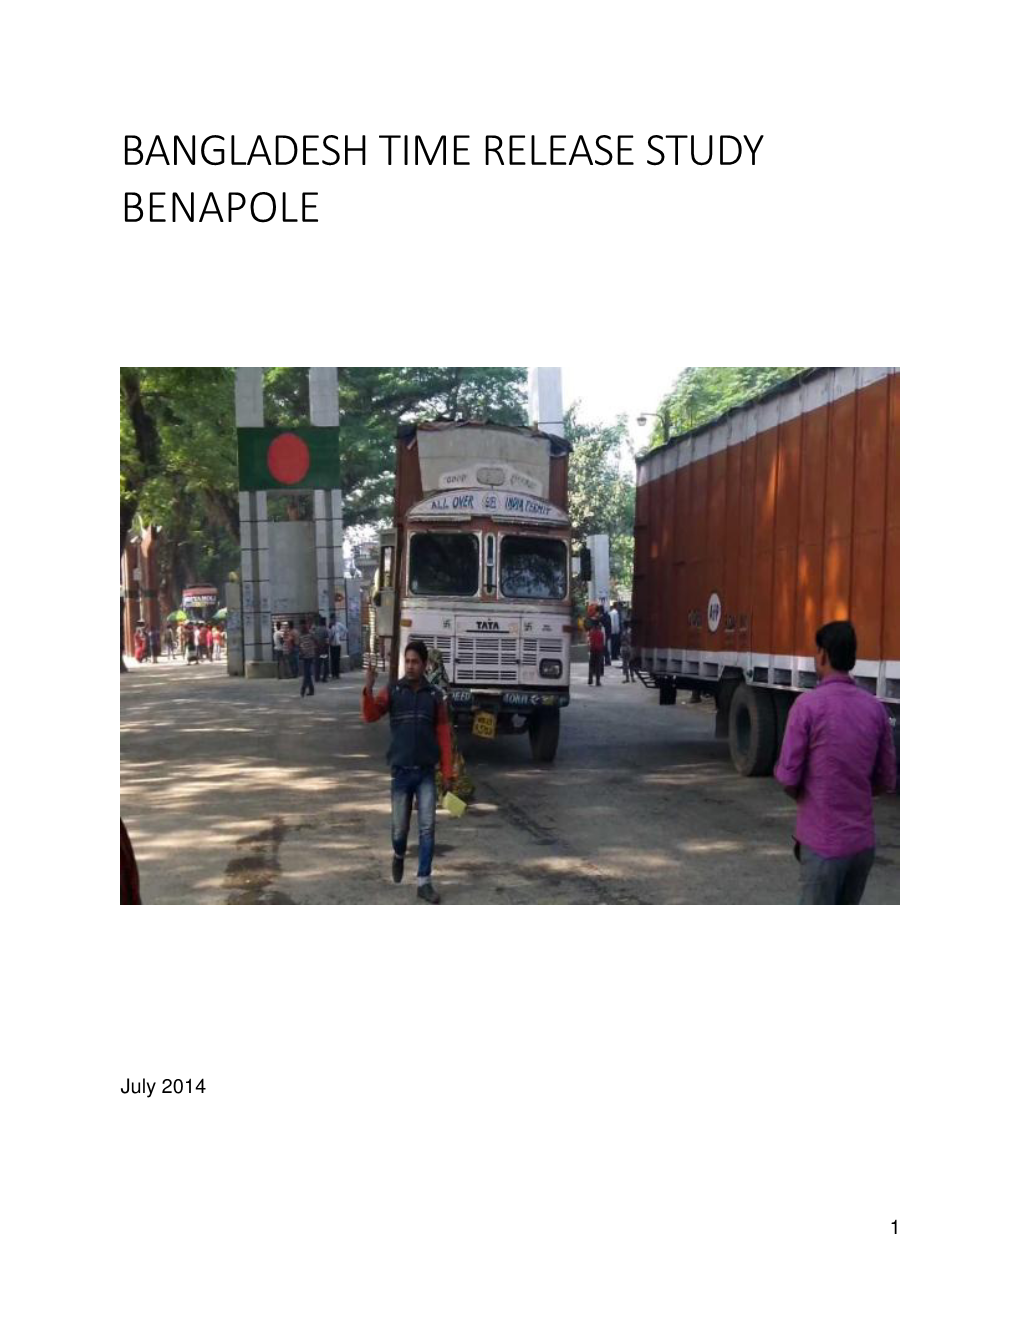 Time Release Study Report- Benapole